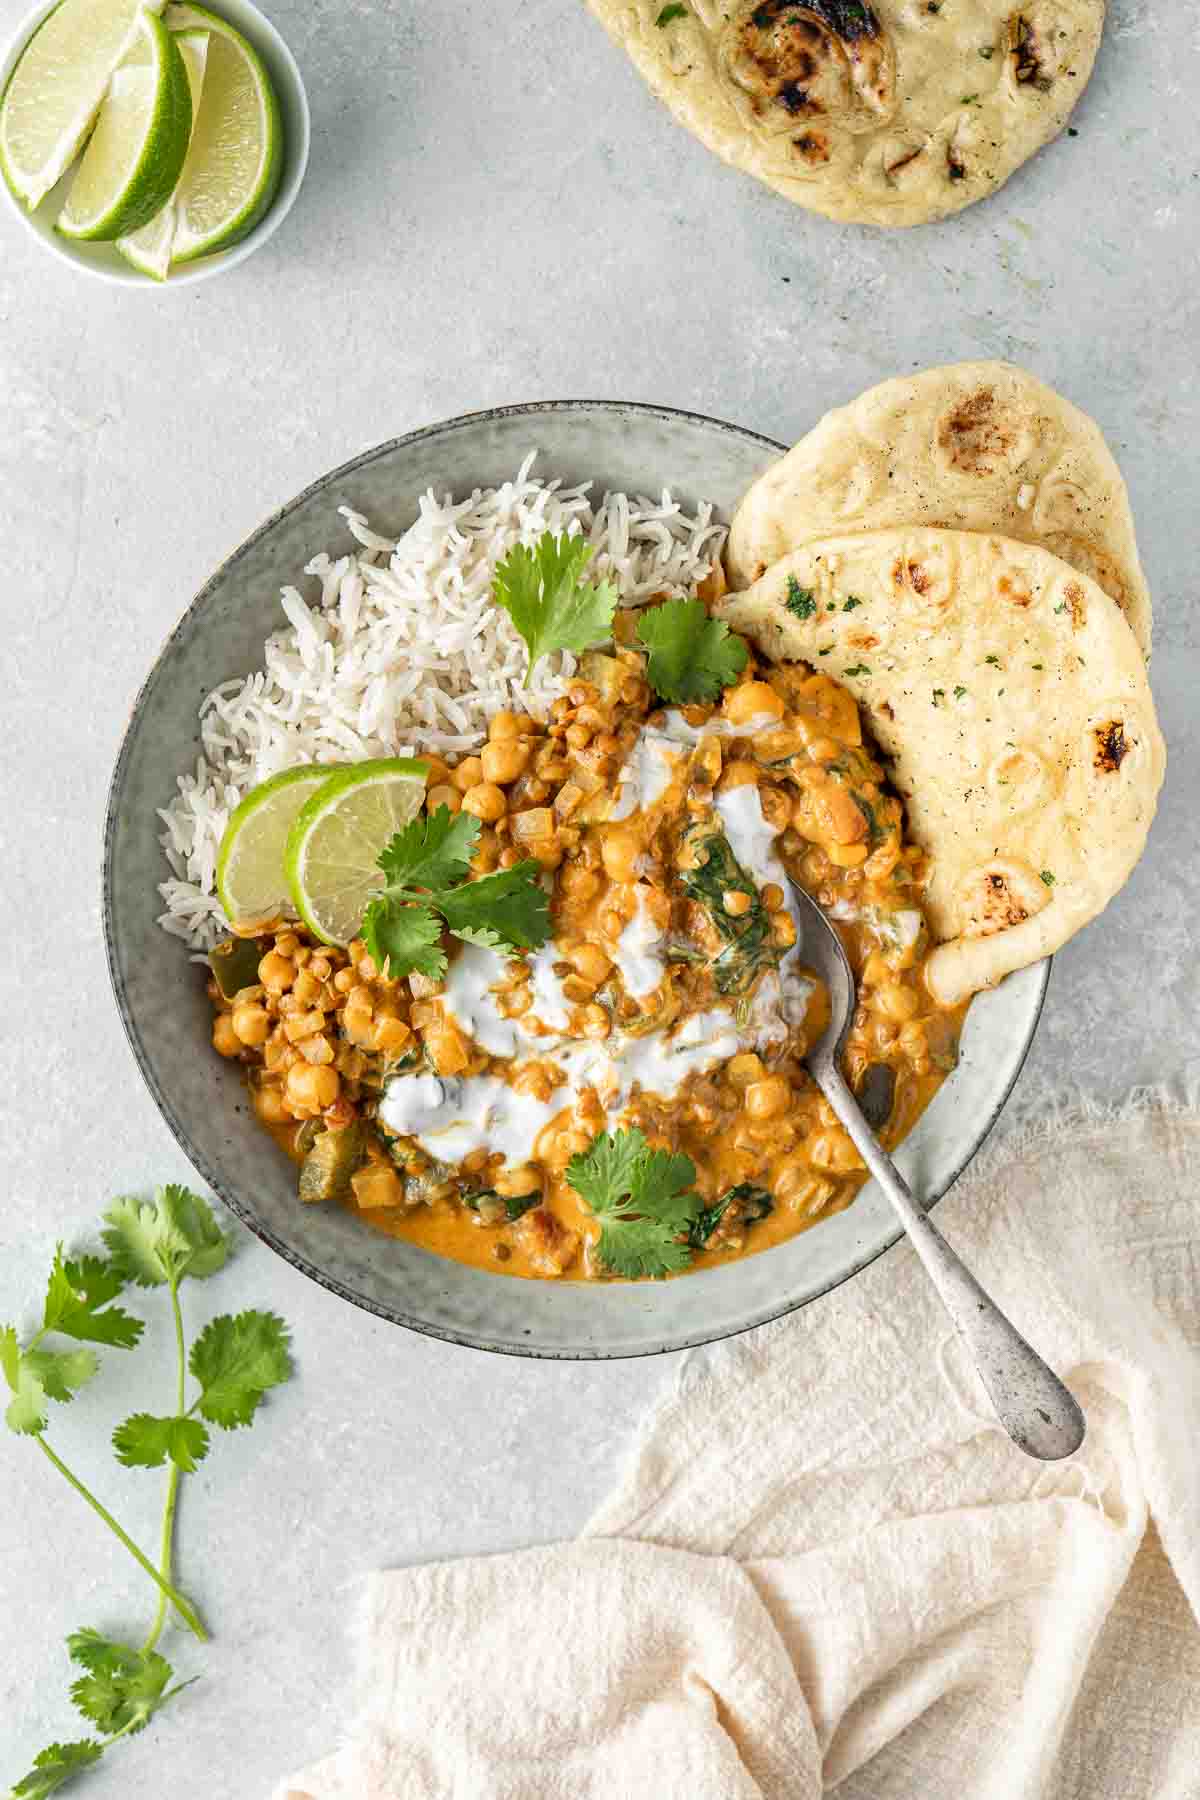 Chickpea curry in a bowl with rice, naan and cilantro.